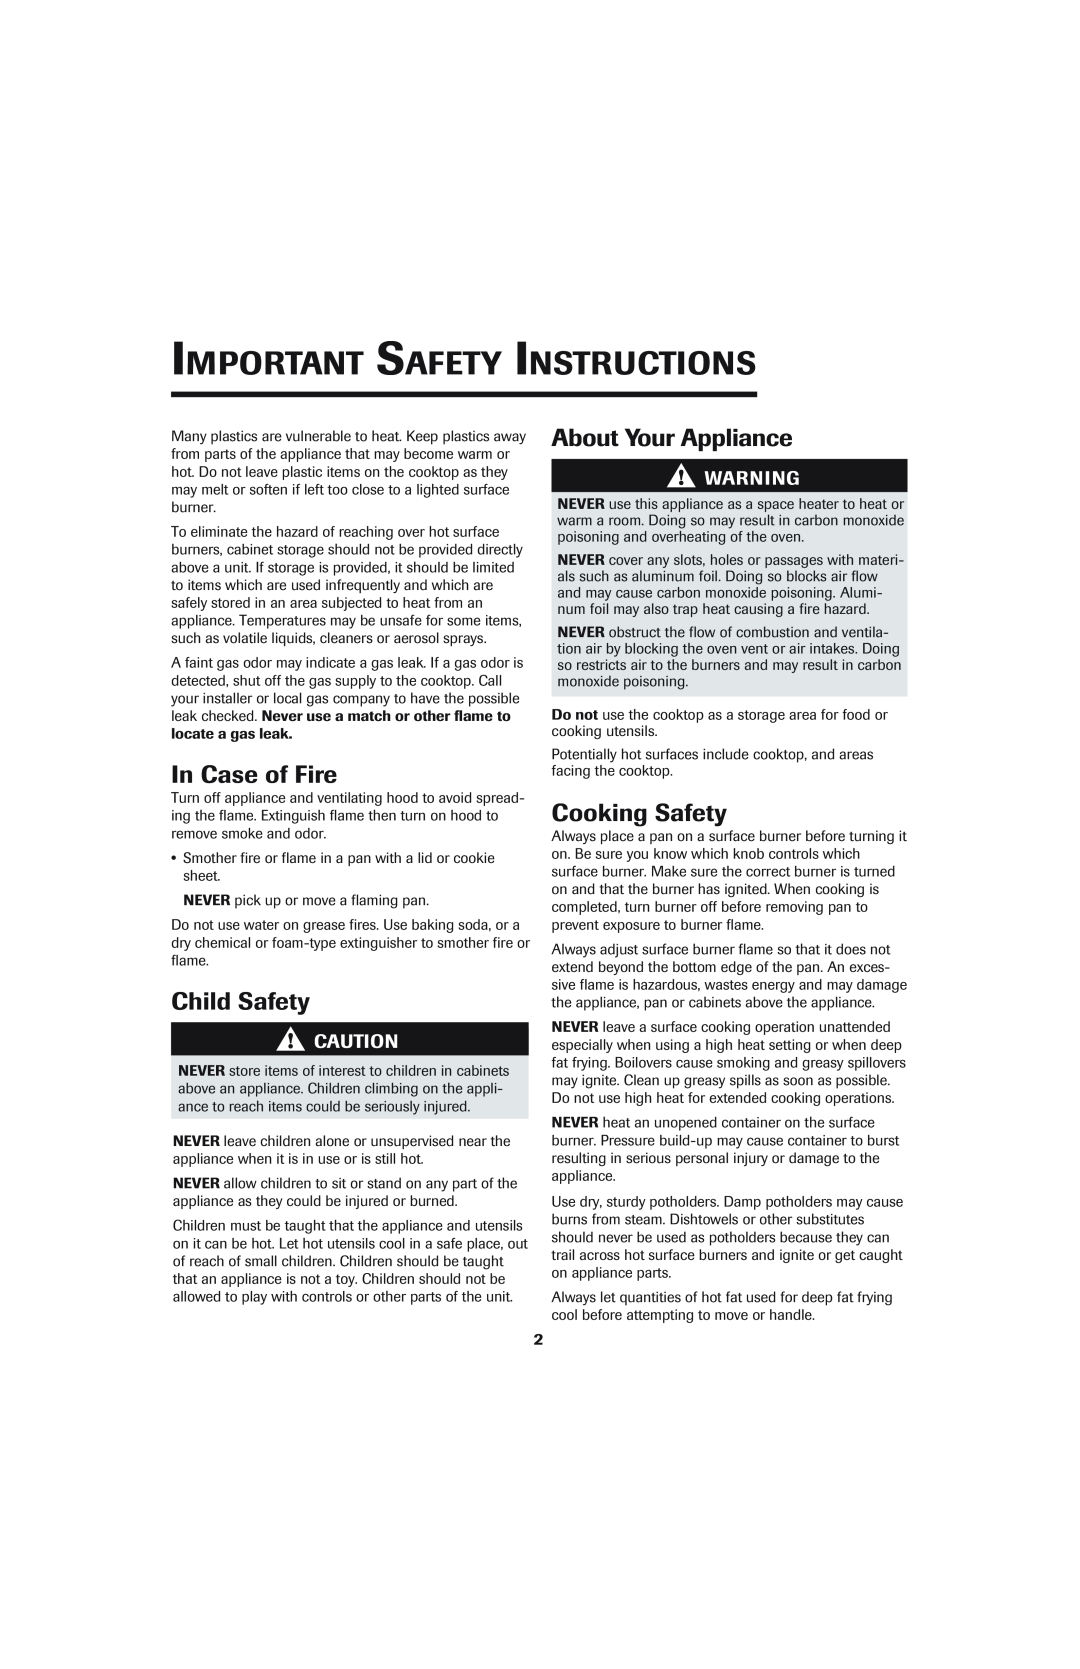 Jenn-Air 8112P342-60 Important Safety Instructions, In Case of Fire, Child Safety, About Your Appliance, Cooking Safety 